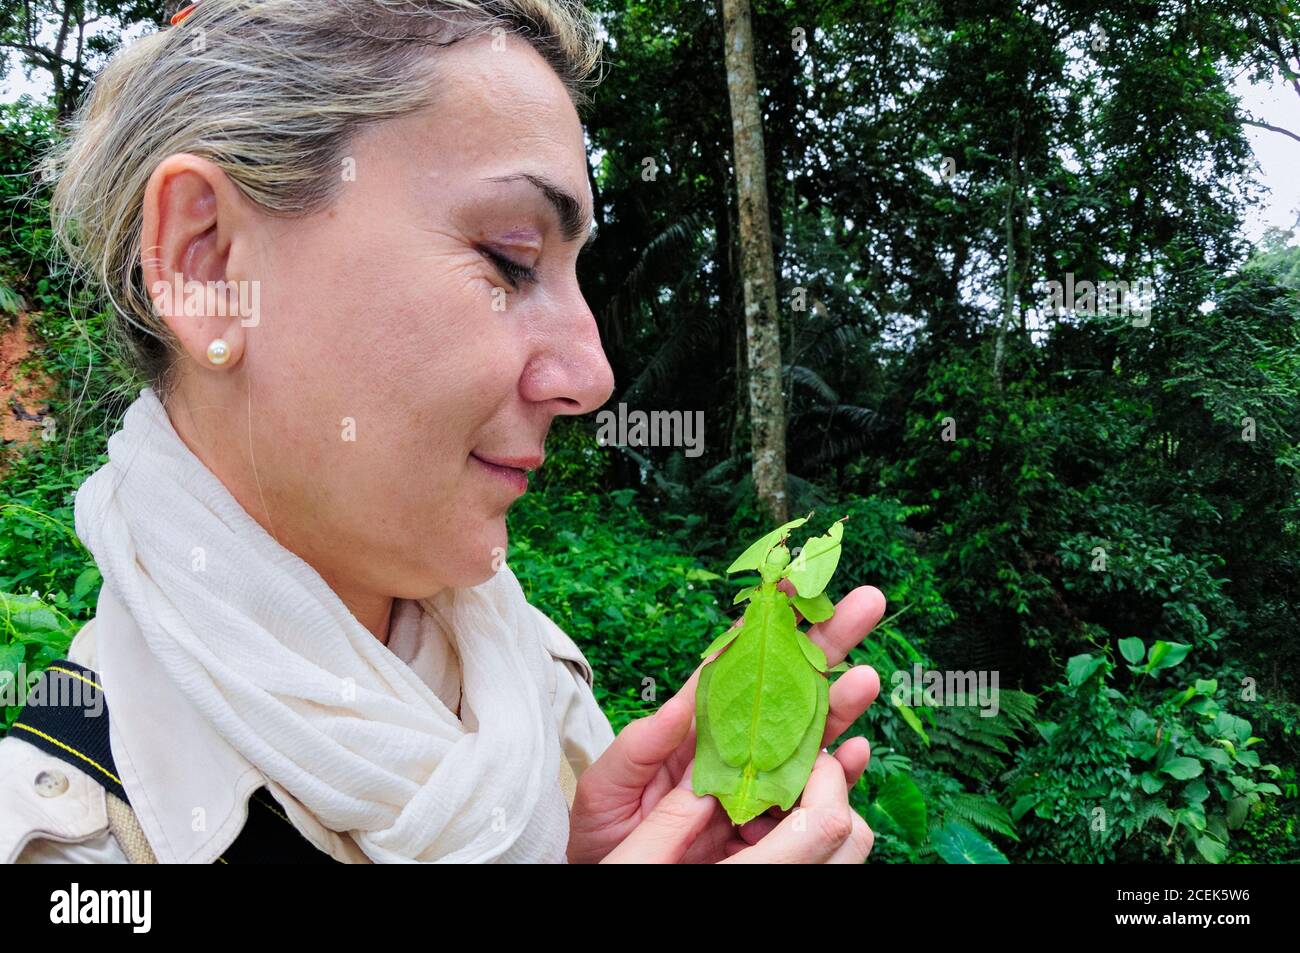 Antonella Ferrari with a Giant Leaf insect Phyllium giganteum, a large nocturnal Phasmid of Southeast Asia which mimics to perfection a set of leaves Stock Photo